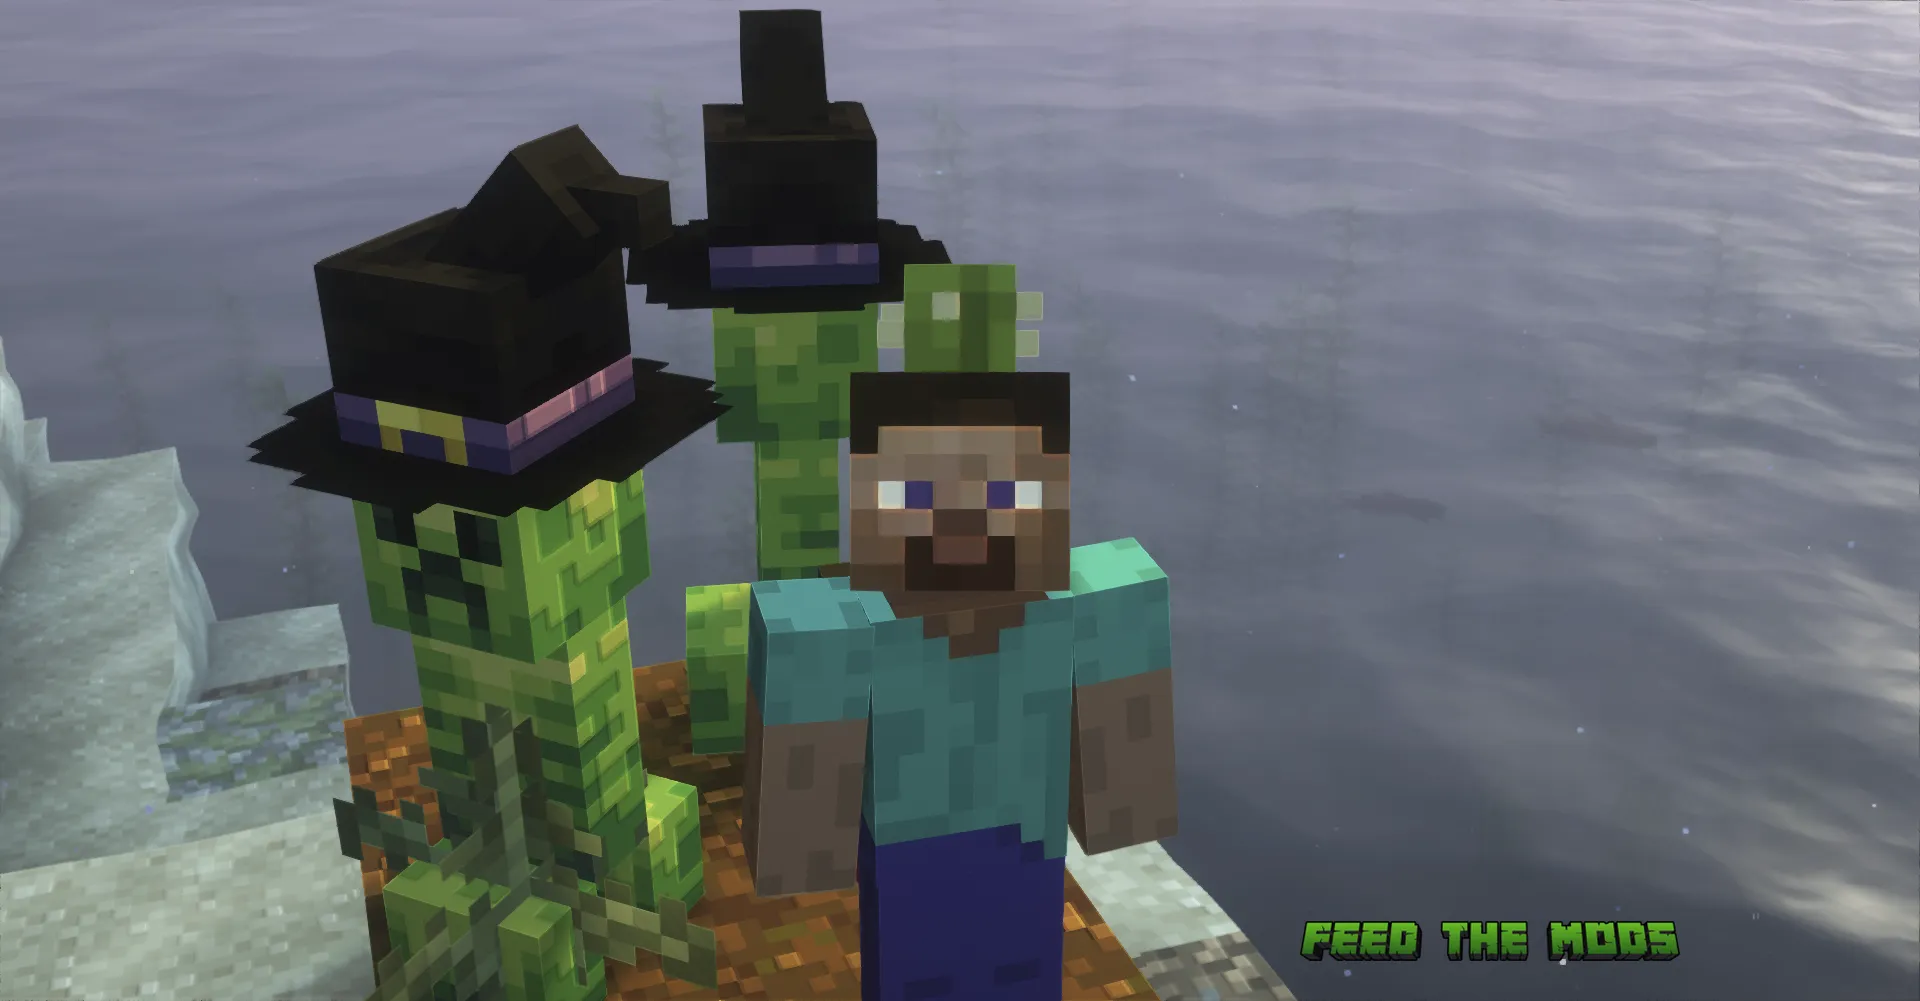 Creeper Overhaul Mod 1.18.1: New Creepers for Your World